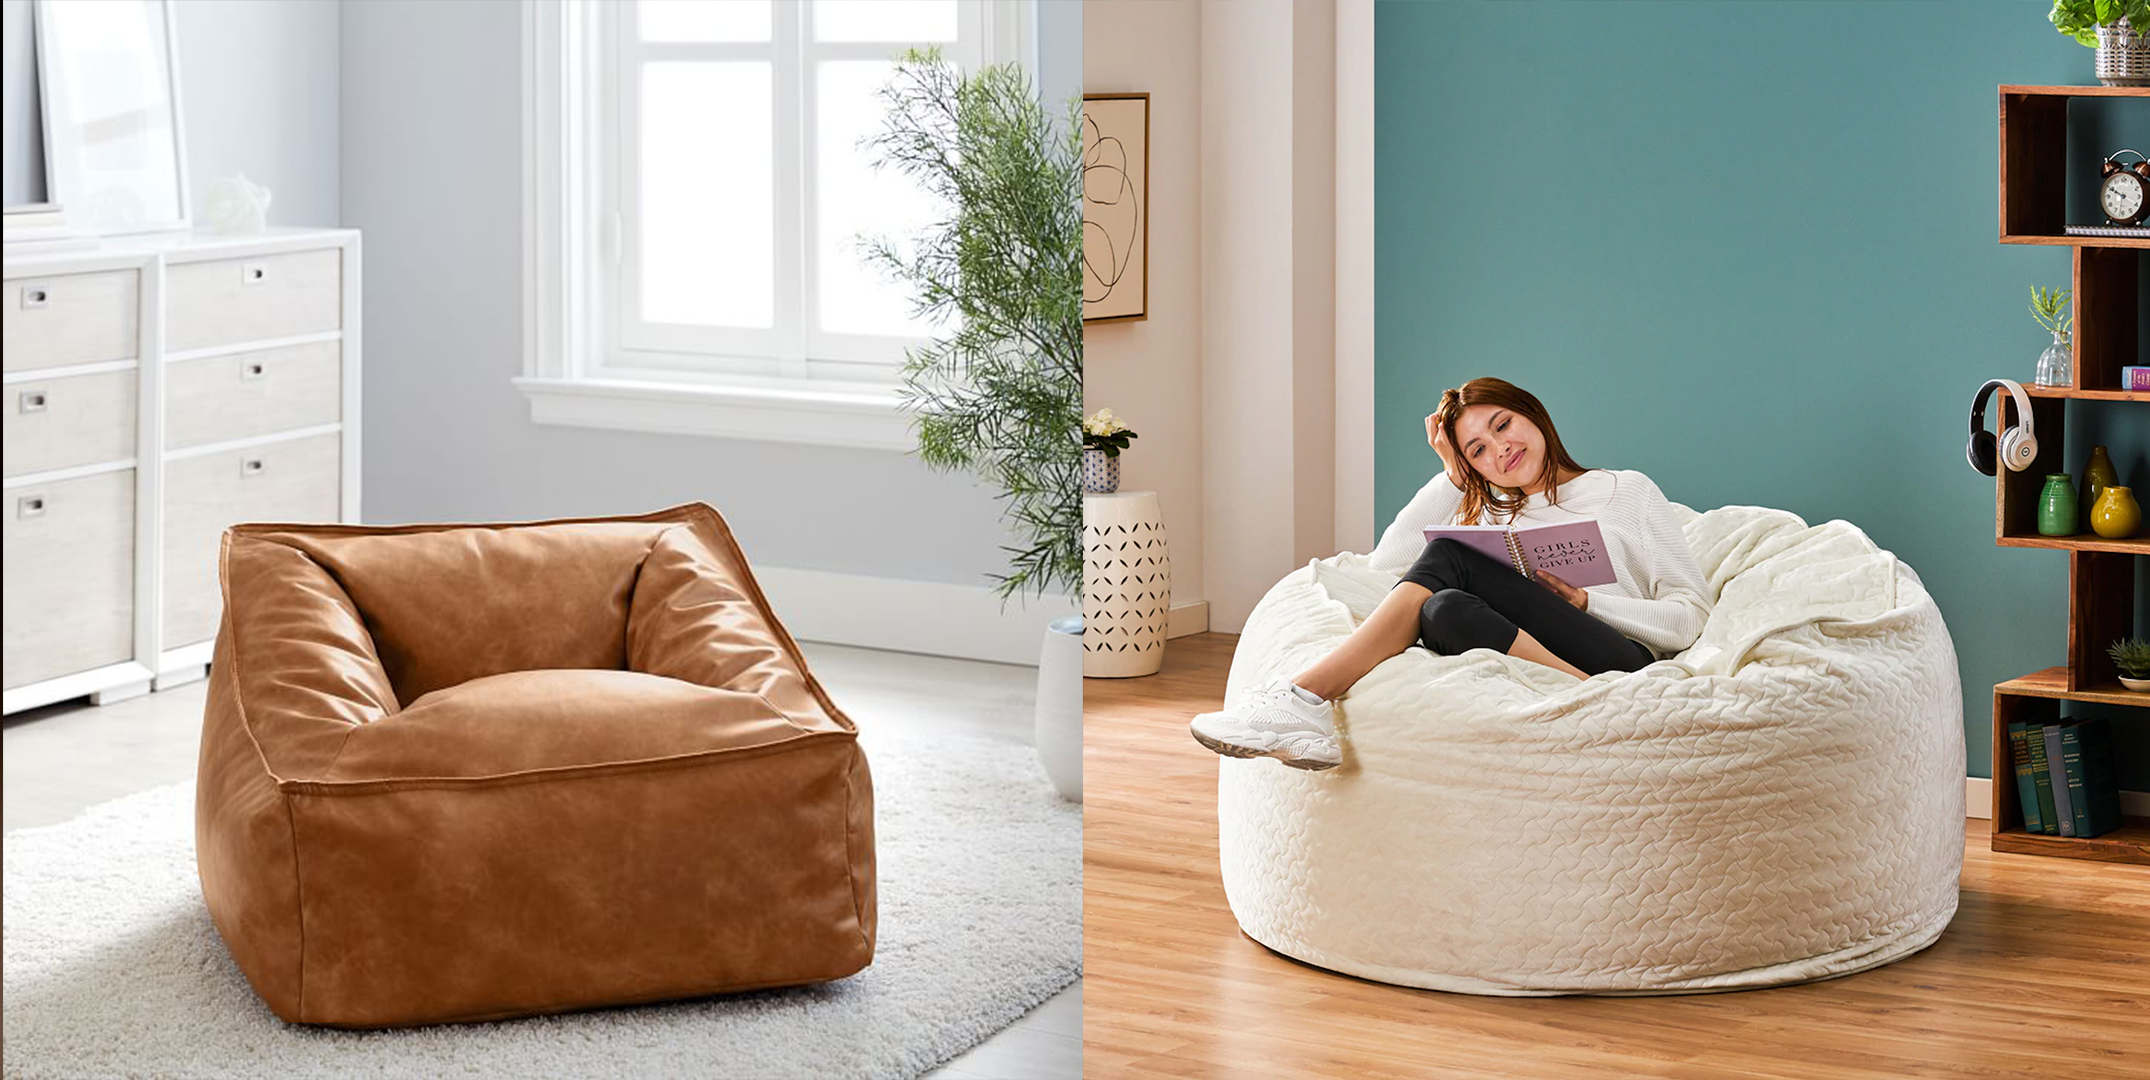 Suede Bean Bag Cover+Ottoman Cover Set Luxury Seat Feeling Movie Chair Footstool 